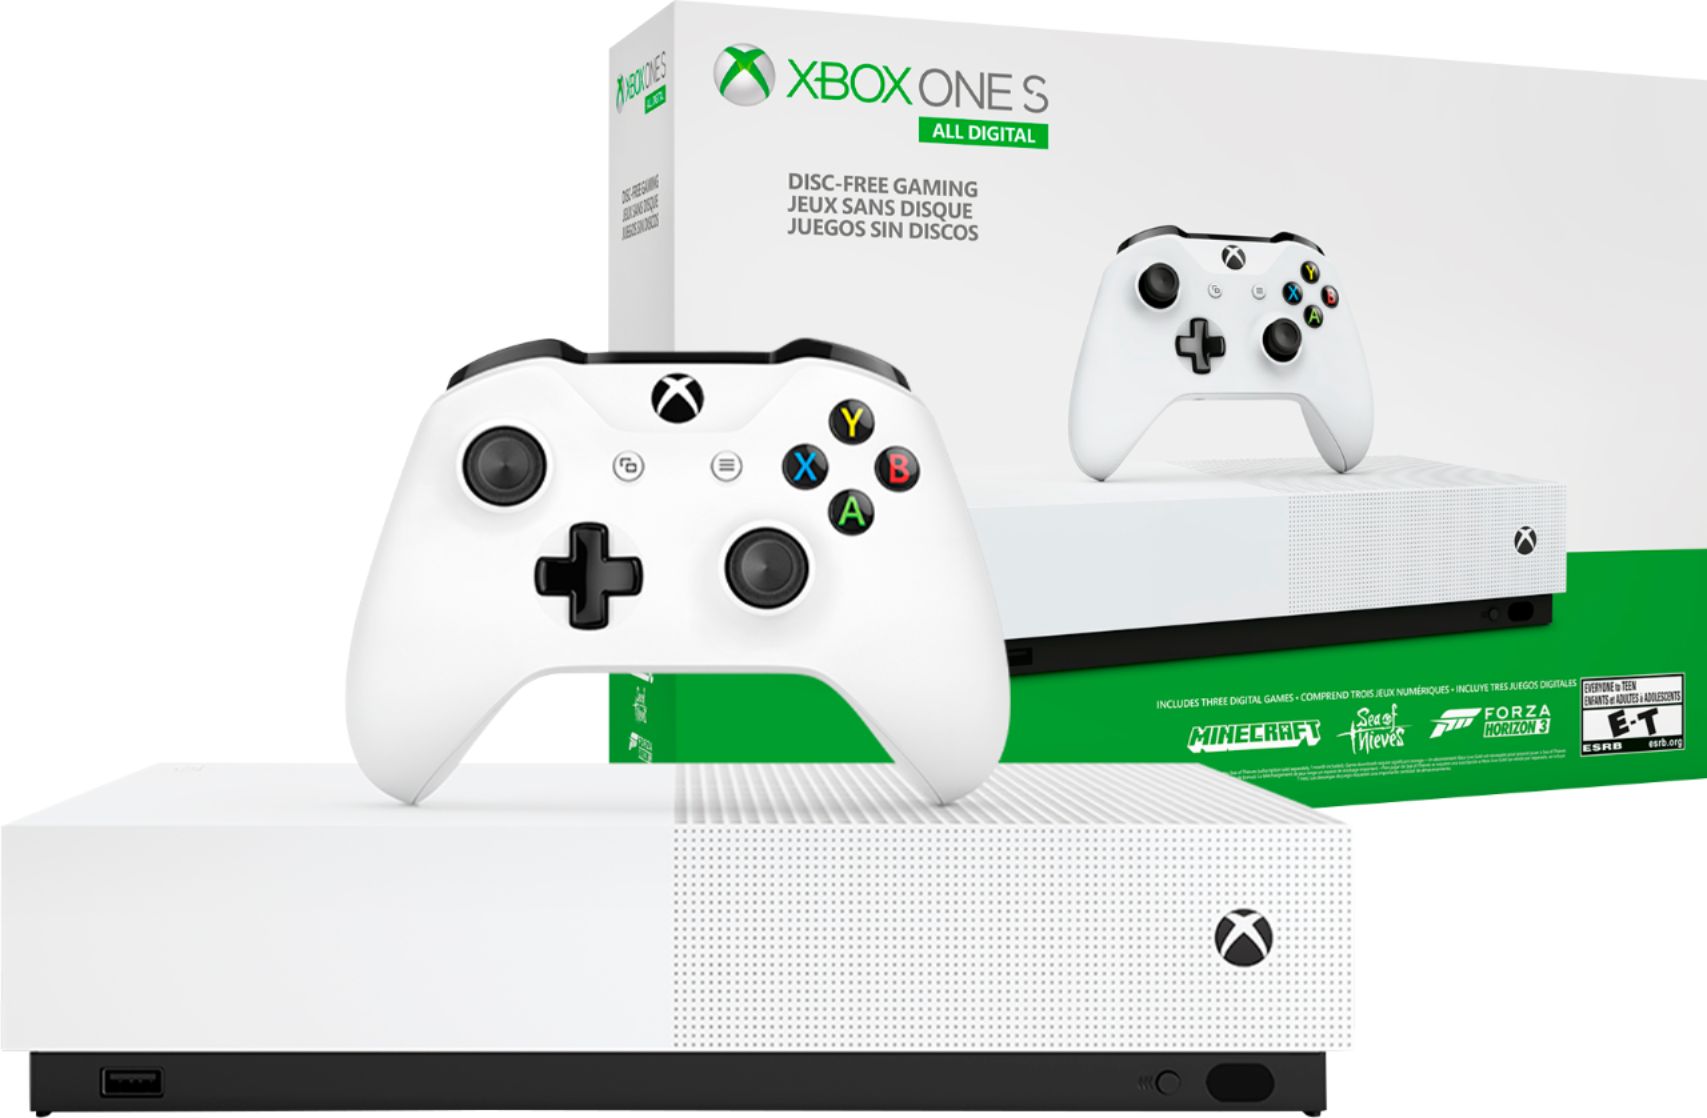 Grommen puur Afkorting Microsoft Xbox One S 1TB All-Digital Edition Console (Disc-free Gaming)  NJP-00024 - Best Buy